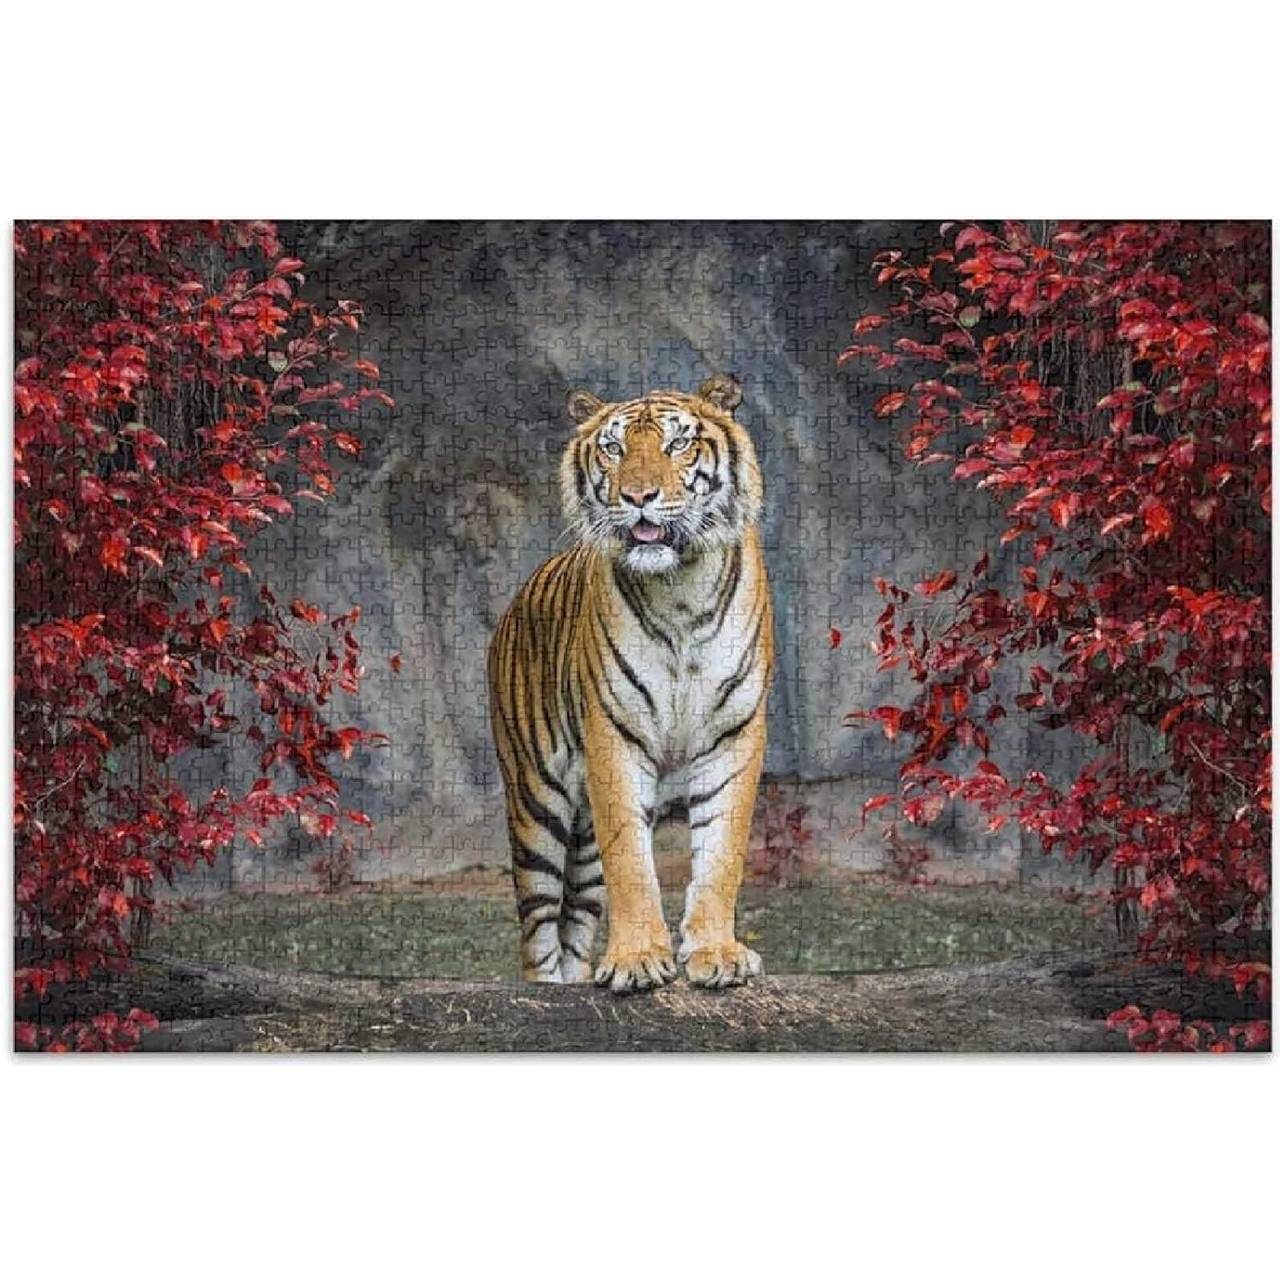 Alkoy Tiger Print Jigsaw Puzzle 1000 Pieces • Price